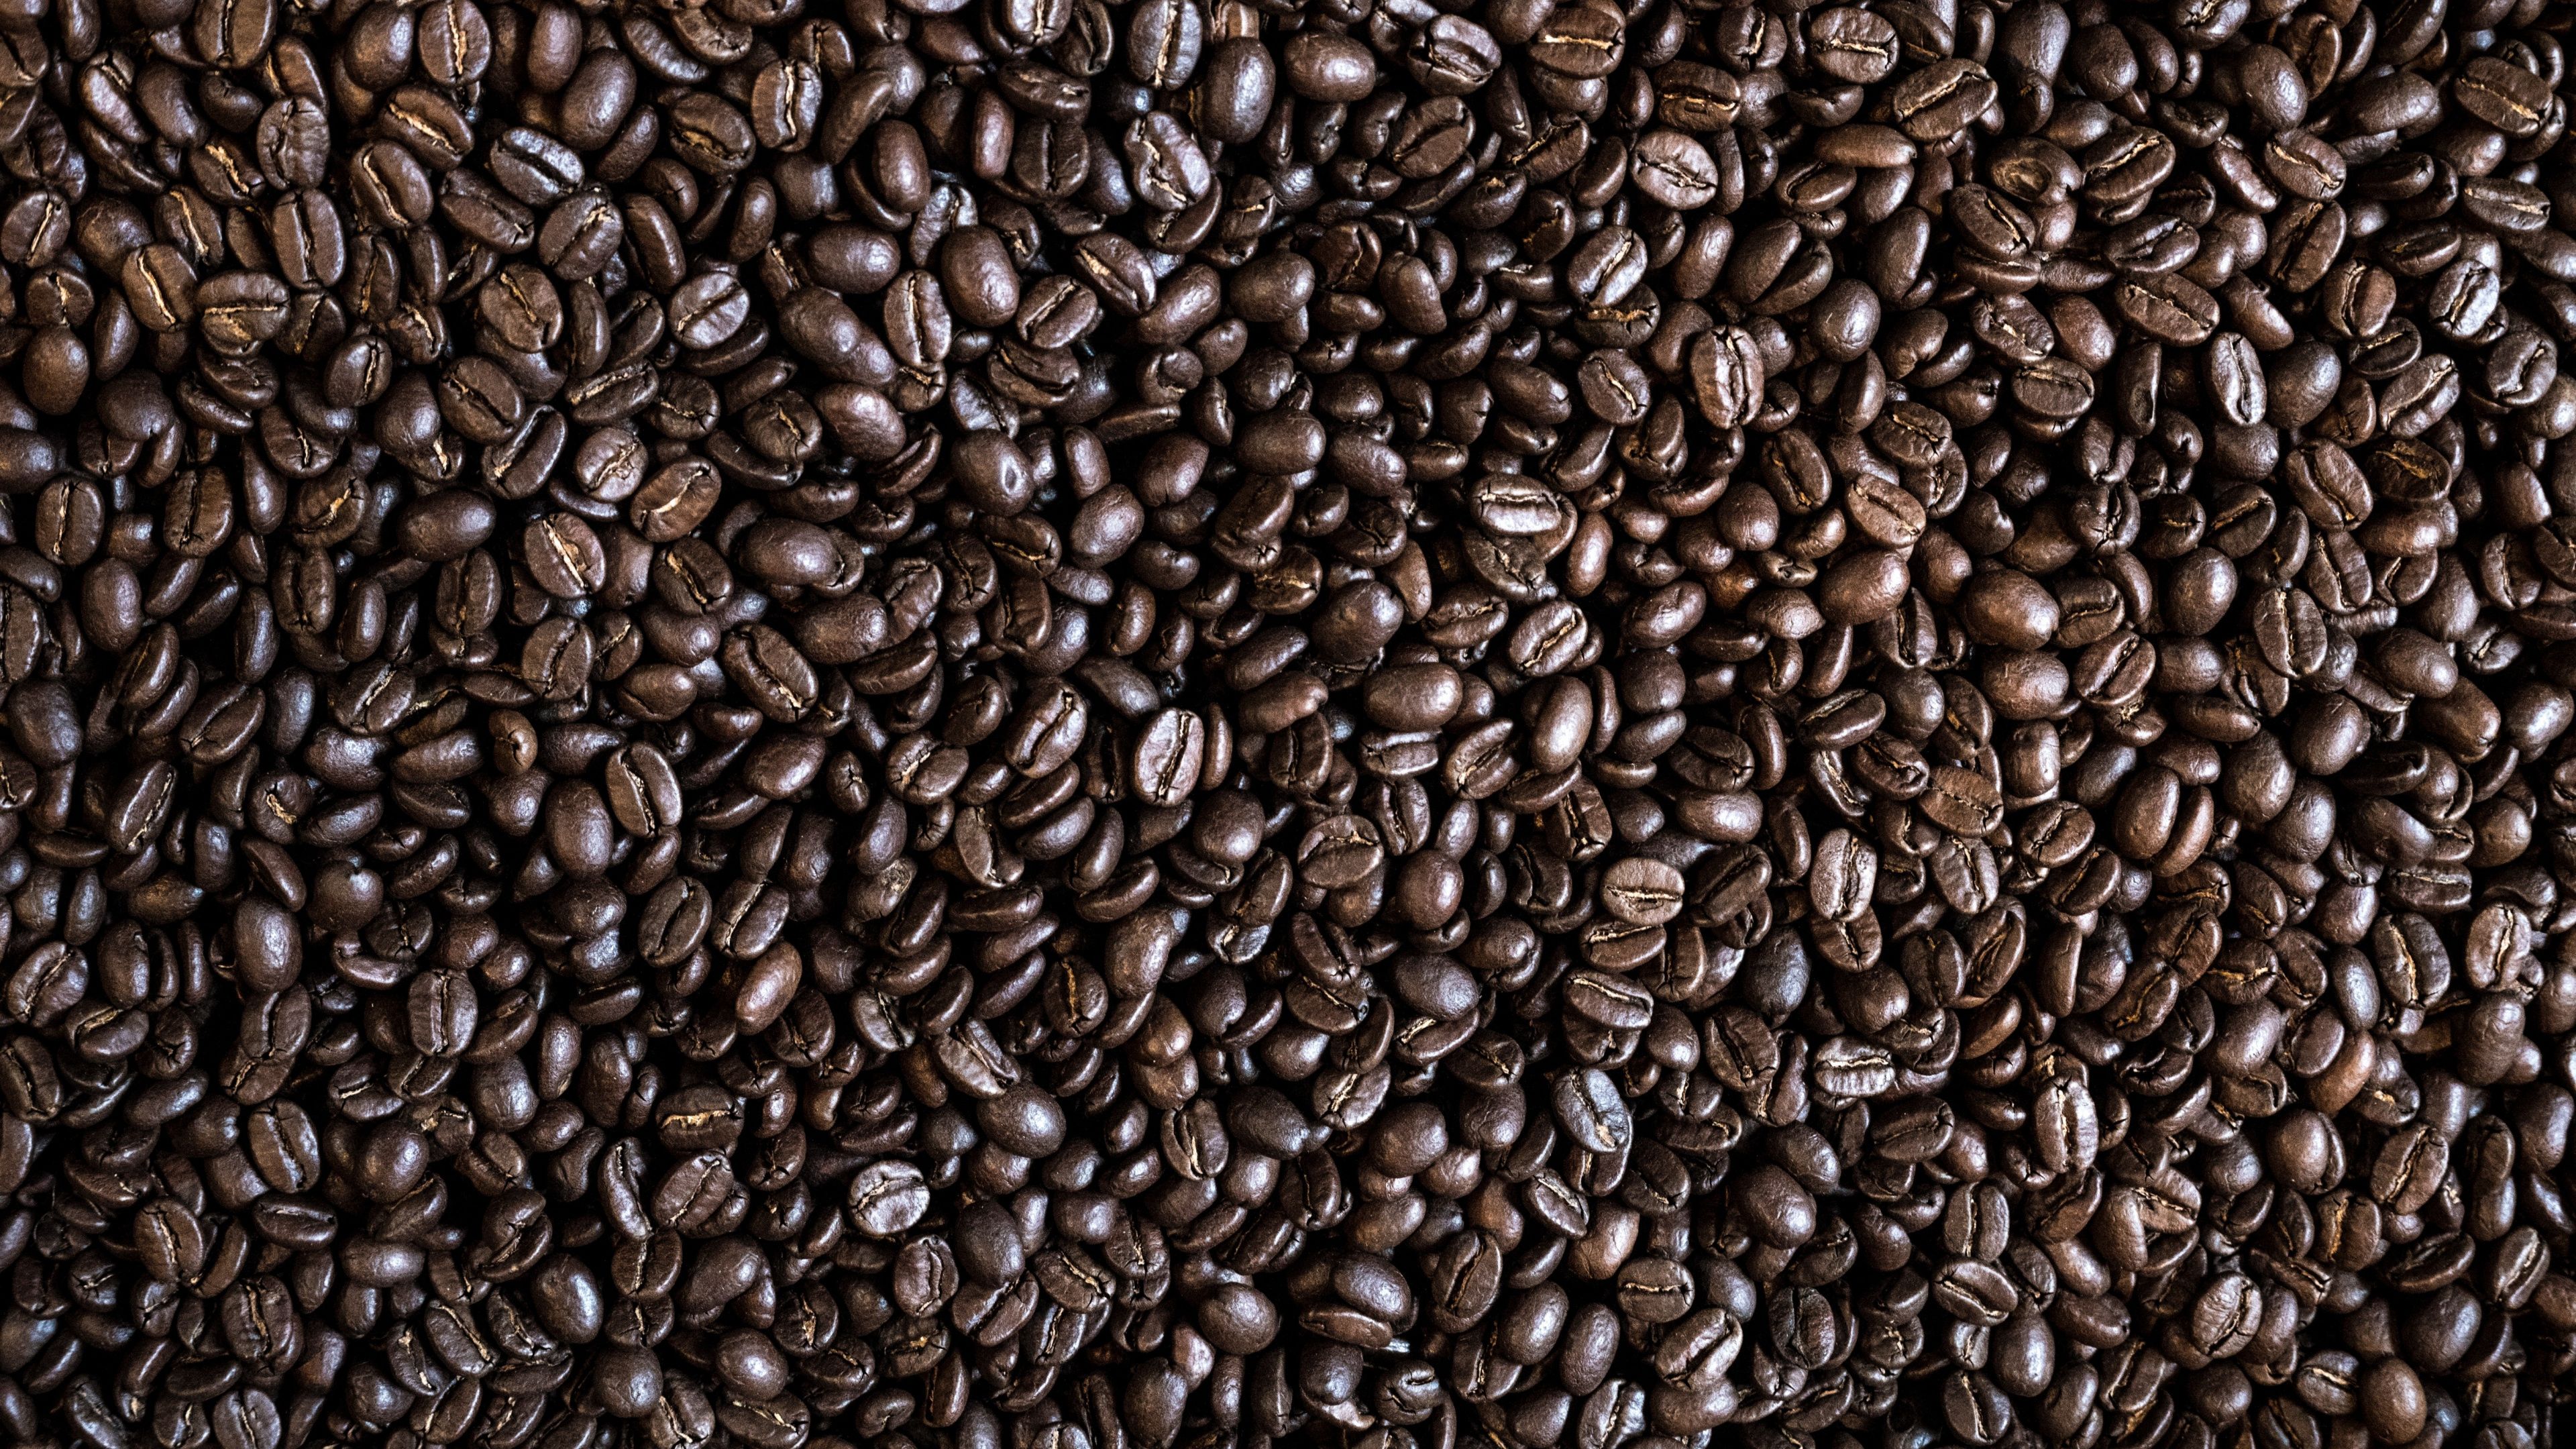 Download Coffee beans, roasted, seed, caffeine wallpaper, 3840x 4K UHD 16: Widescreen